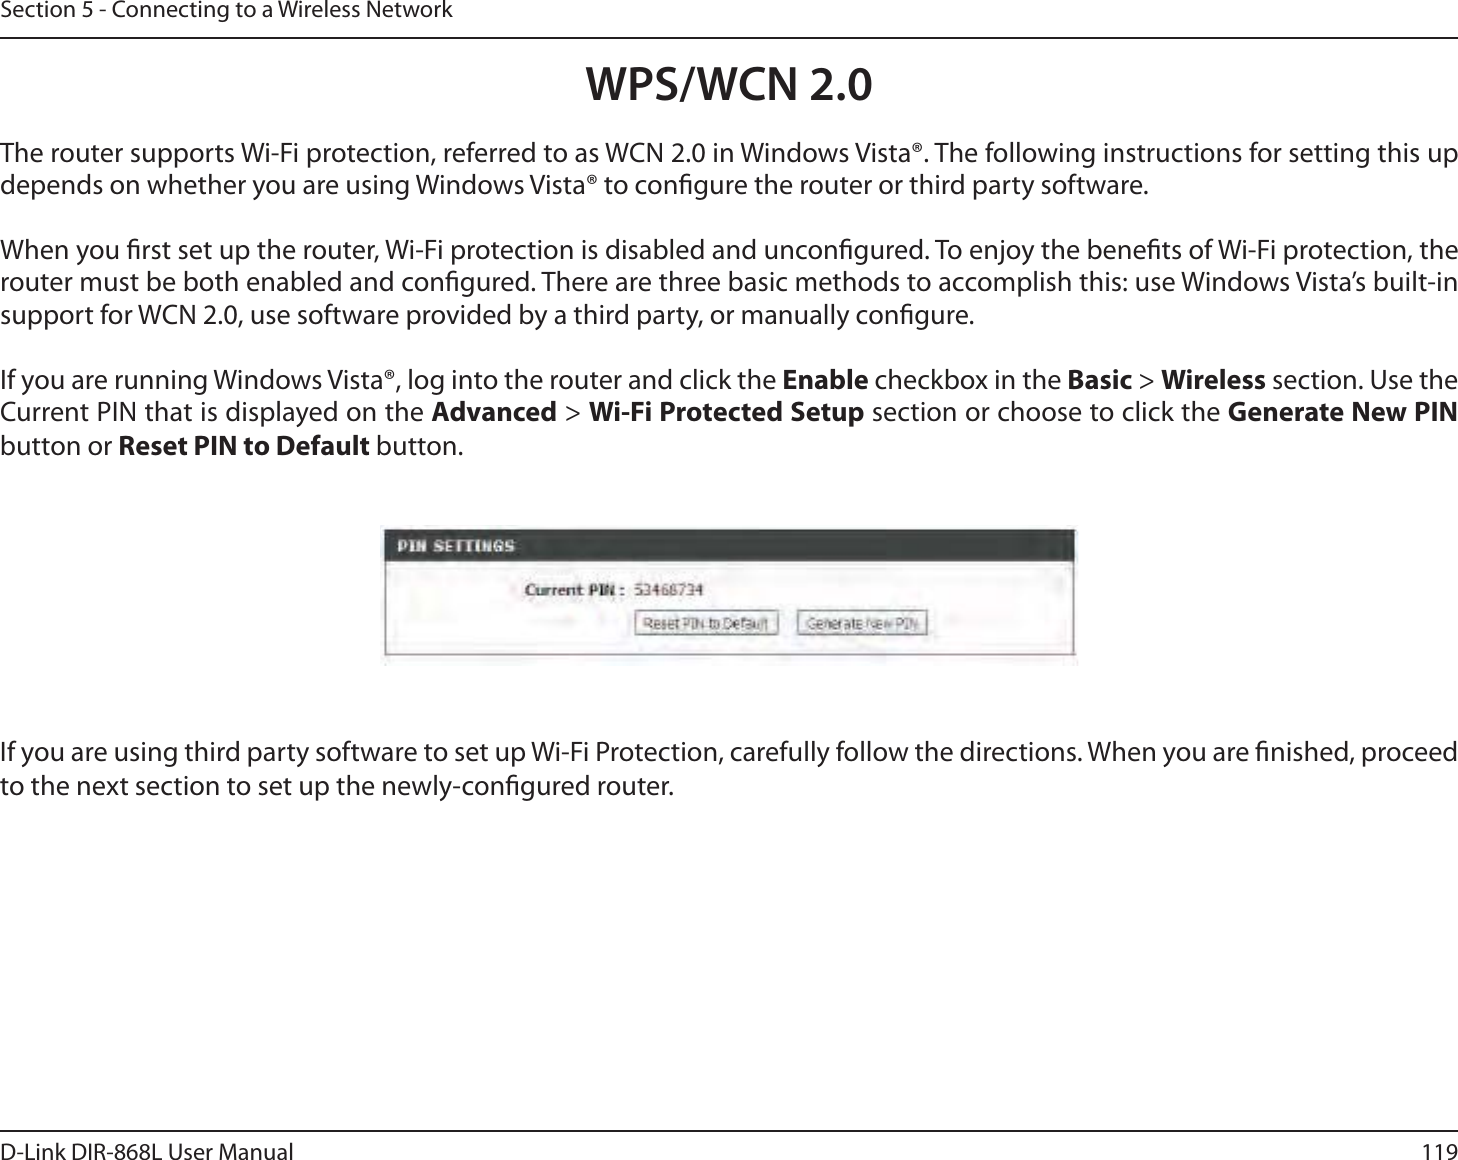 119D-Link DIR-868L User ManualSection 5 - Connecting to a Wireless NetworkWPS/WCN 2.0The router supports Wi-Fi protection, referred to as WCN 2.0 in Windows Vista®. The following instructions for setting this up depends on whether you are using Windows Vista® to congure the router or third party software.        When you rst set up the router, Wi-Fi protection is disabled and uncongured. To enjoy the benets of Wi-Fi protection, the router must be both enabled and congured. There are three basic methods to accomplish this: use Windows Vista’s built-in support for WCN 2.0, use software provided by a third party, or manually congure. If you are running Windows Vista®, log into the router and click the Enable checkbox in the Basic &gt; Wireless section. Use the Current PIN that is displayed on the Advanced &gt; Wi-Fi Protected Setup section or choose to click the Generate New PIN button or Reset PIN to Default button. If you are using third party software to set up Wi-Fi Protection, carefully follow the directions. When you are nished, proceed to the next section to set up the newly-congured router. 